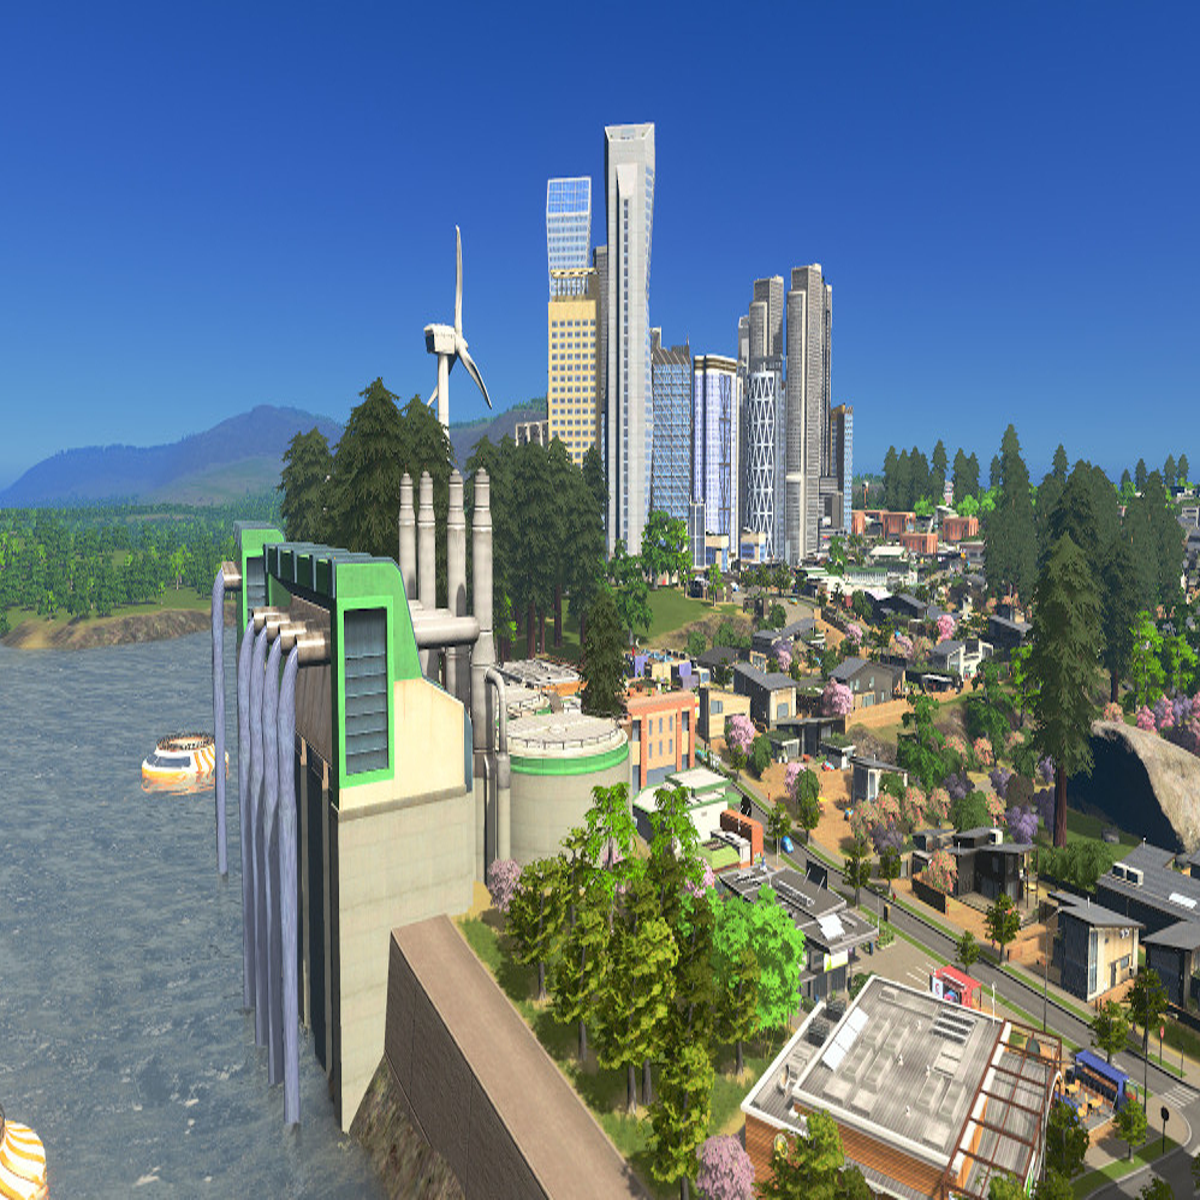 Top 10 mods for Cities: Skylines on PC